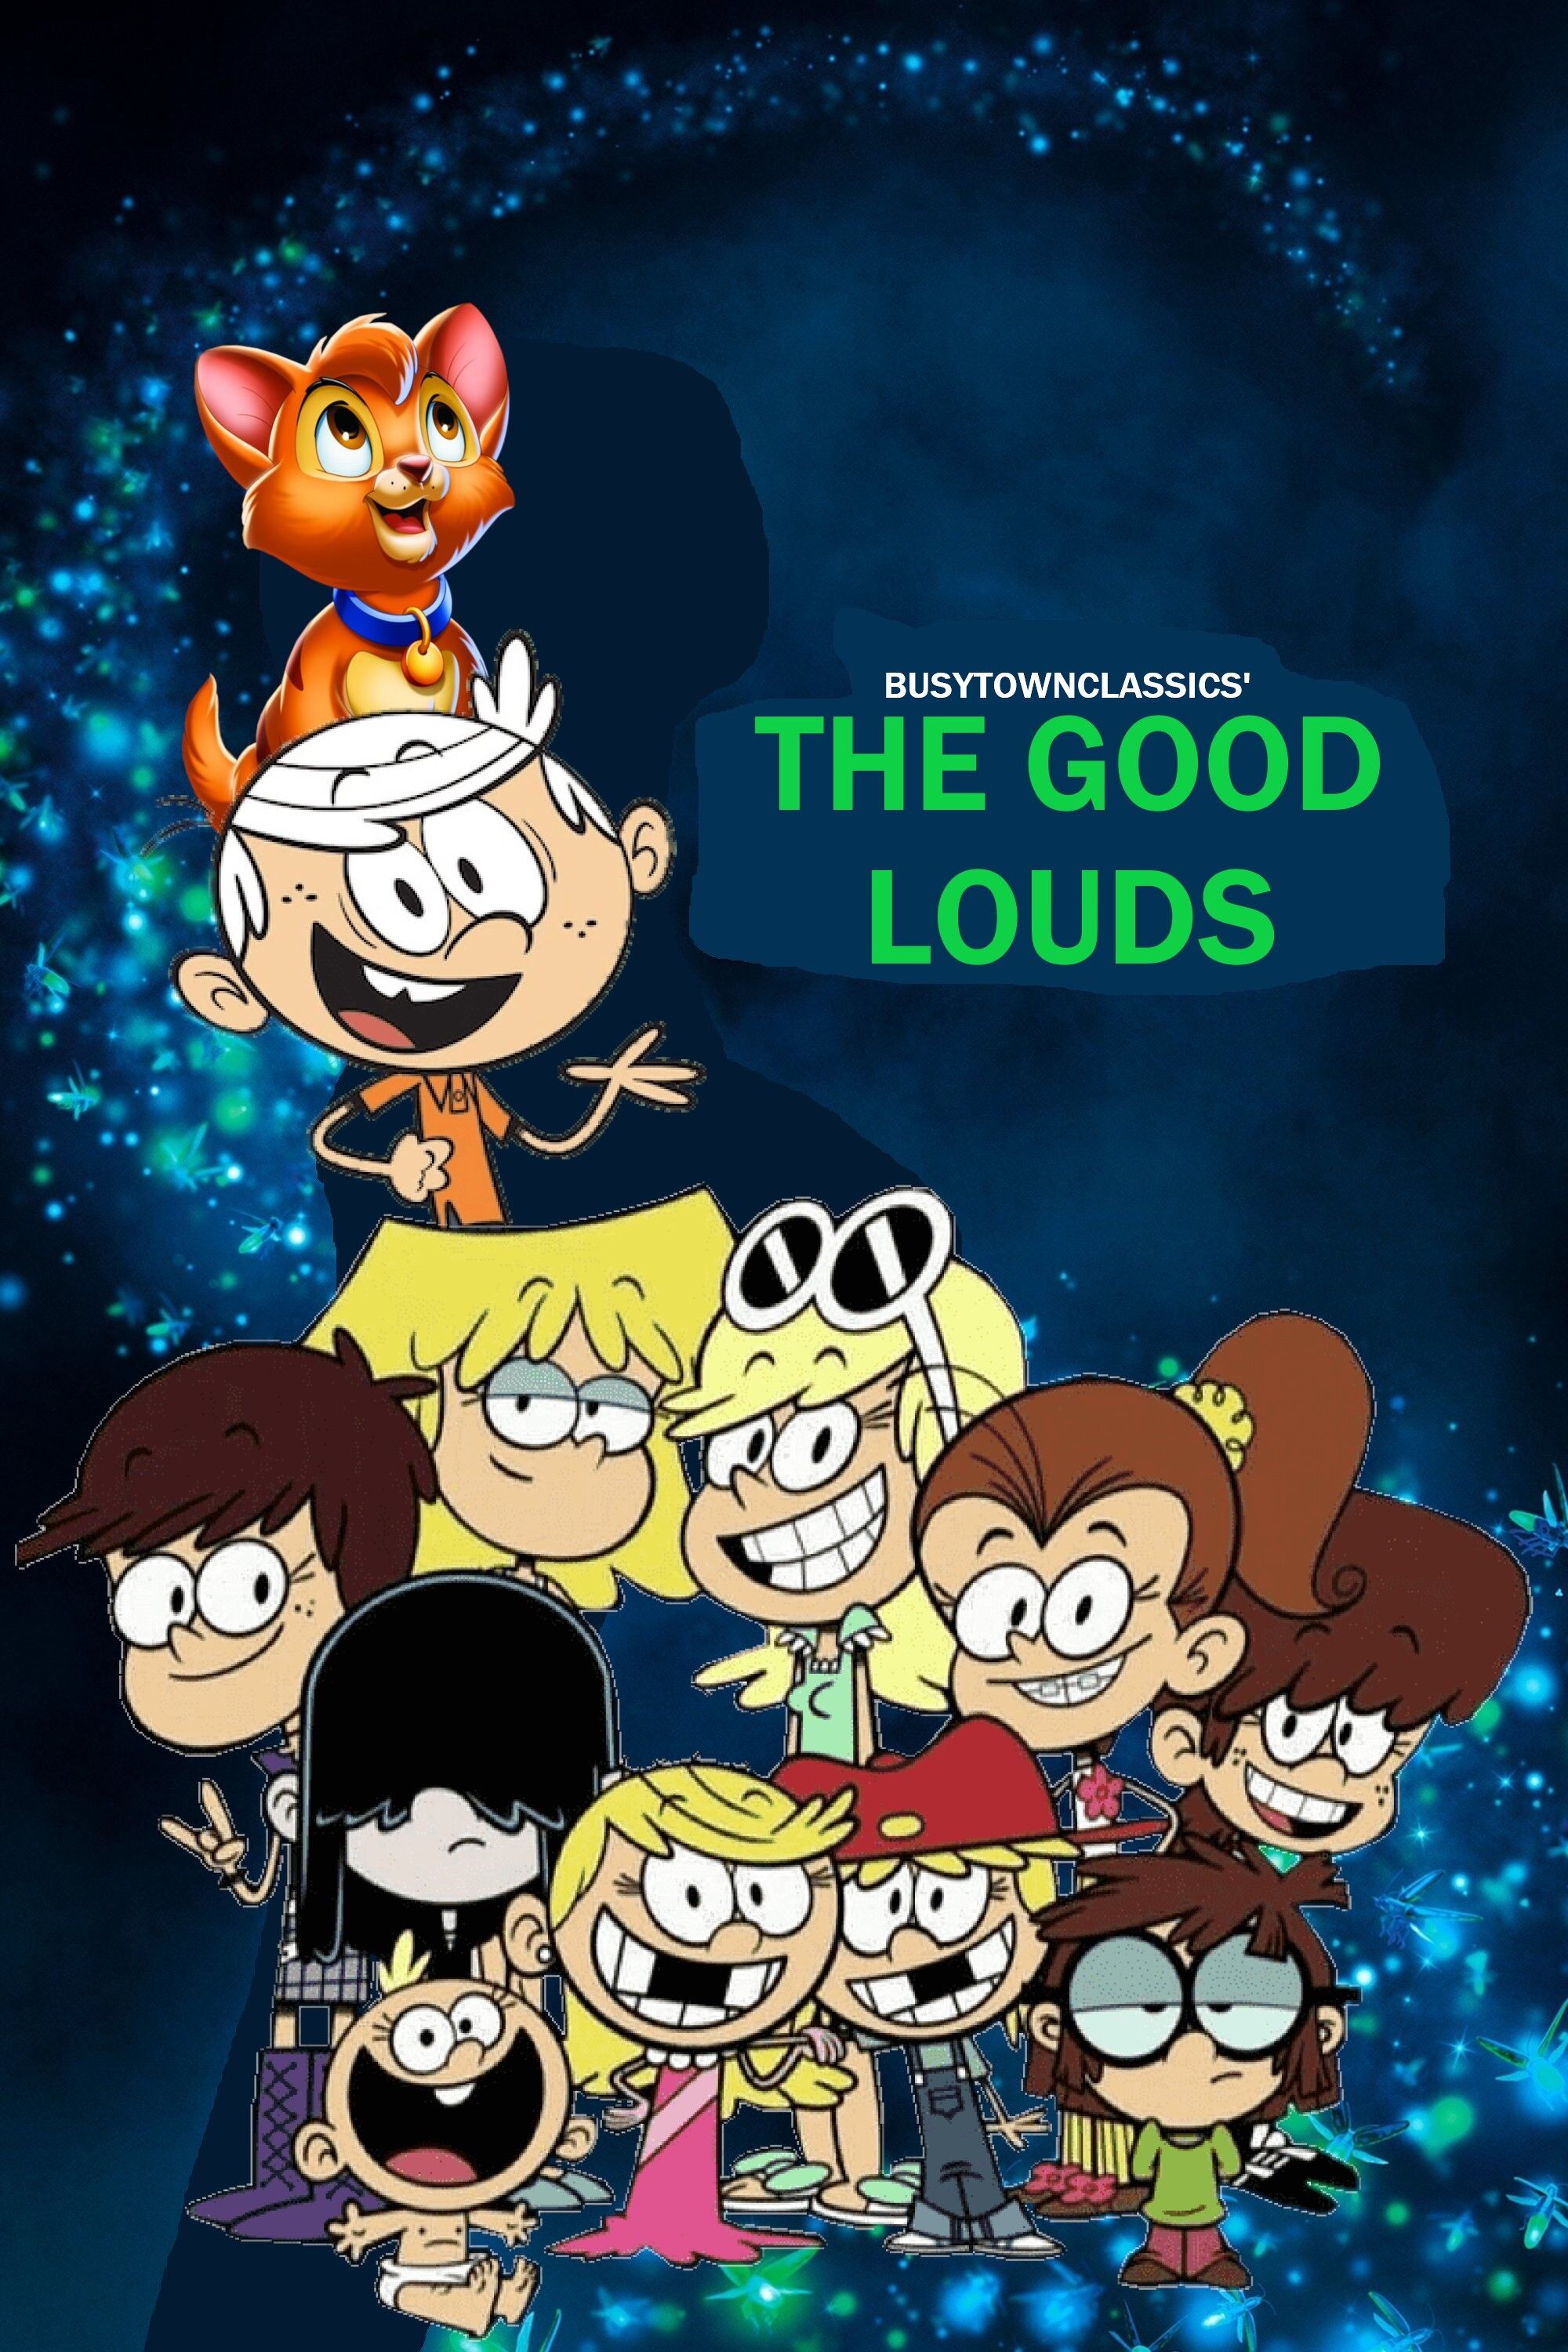 https://static.wikia.nocookie.net/fictionrulezforever/images/b/bf/The_Good_Louds_poster.jpg/revision/latest/scale-to-width-down/2000?cb=20230528203007